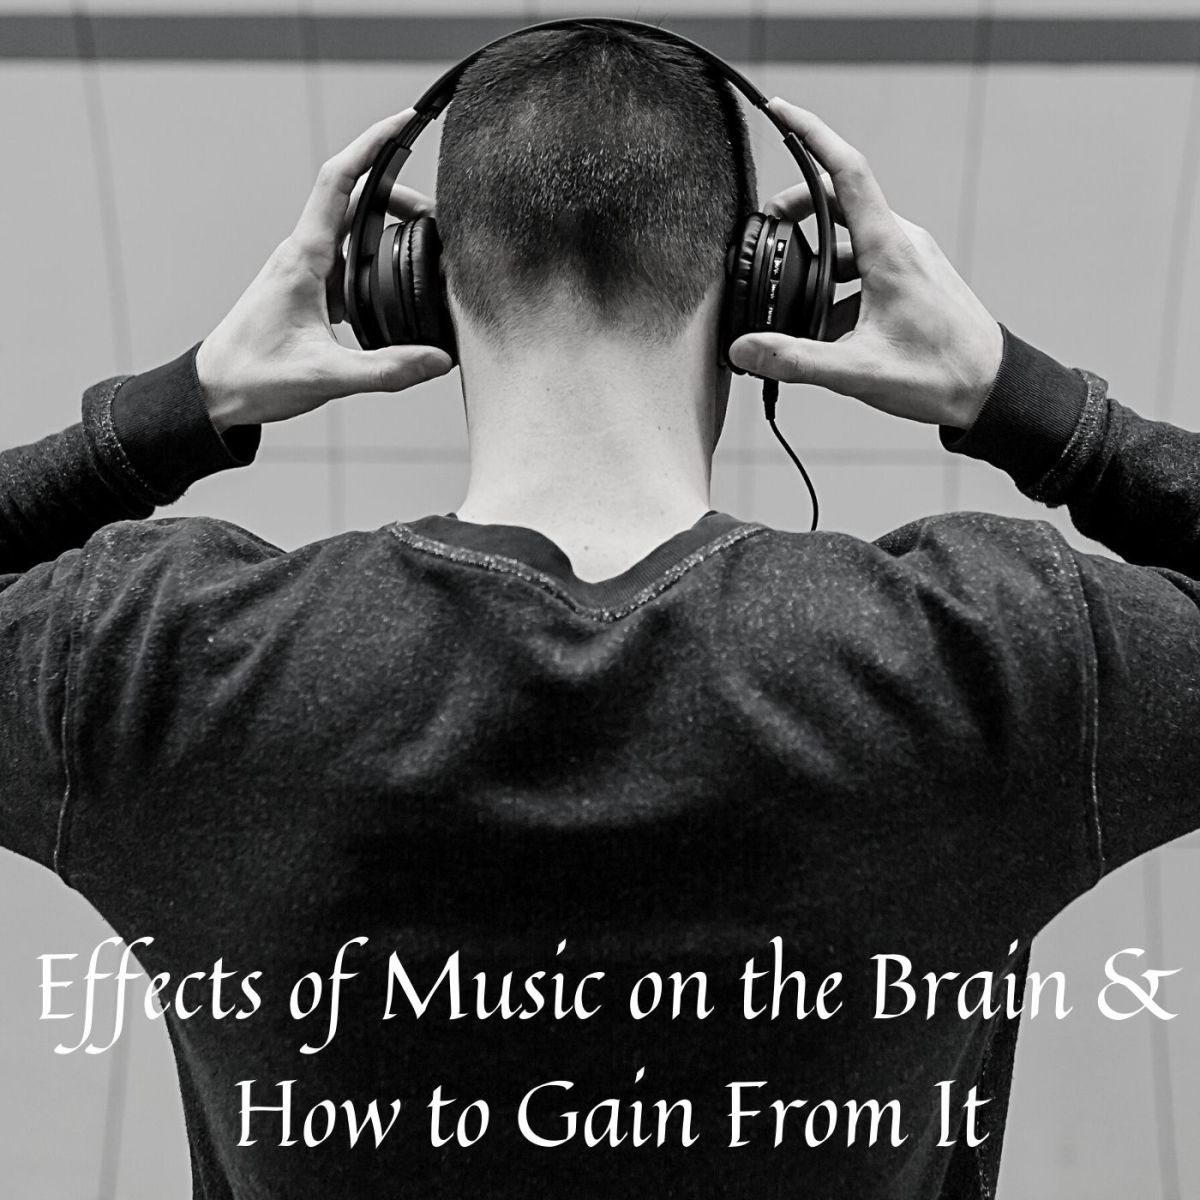 Discover the benefits of music on body, mind, relationships & more